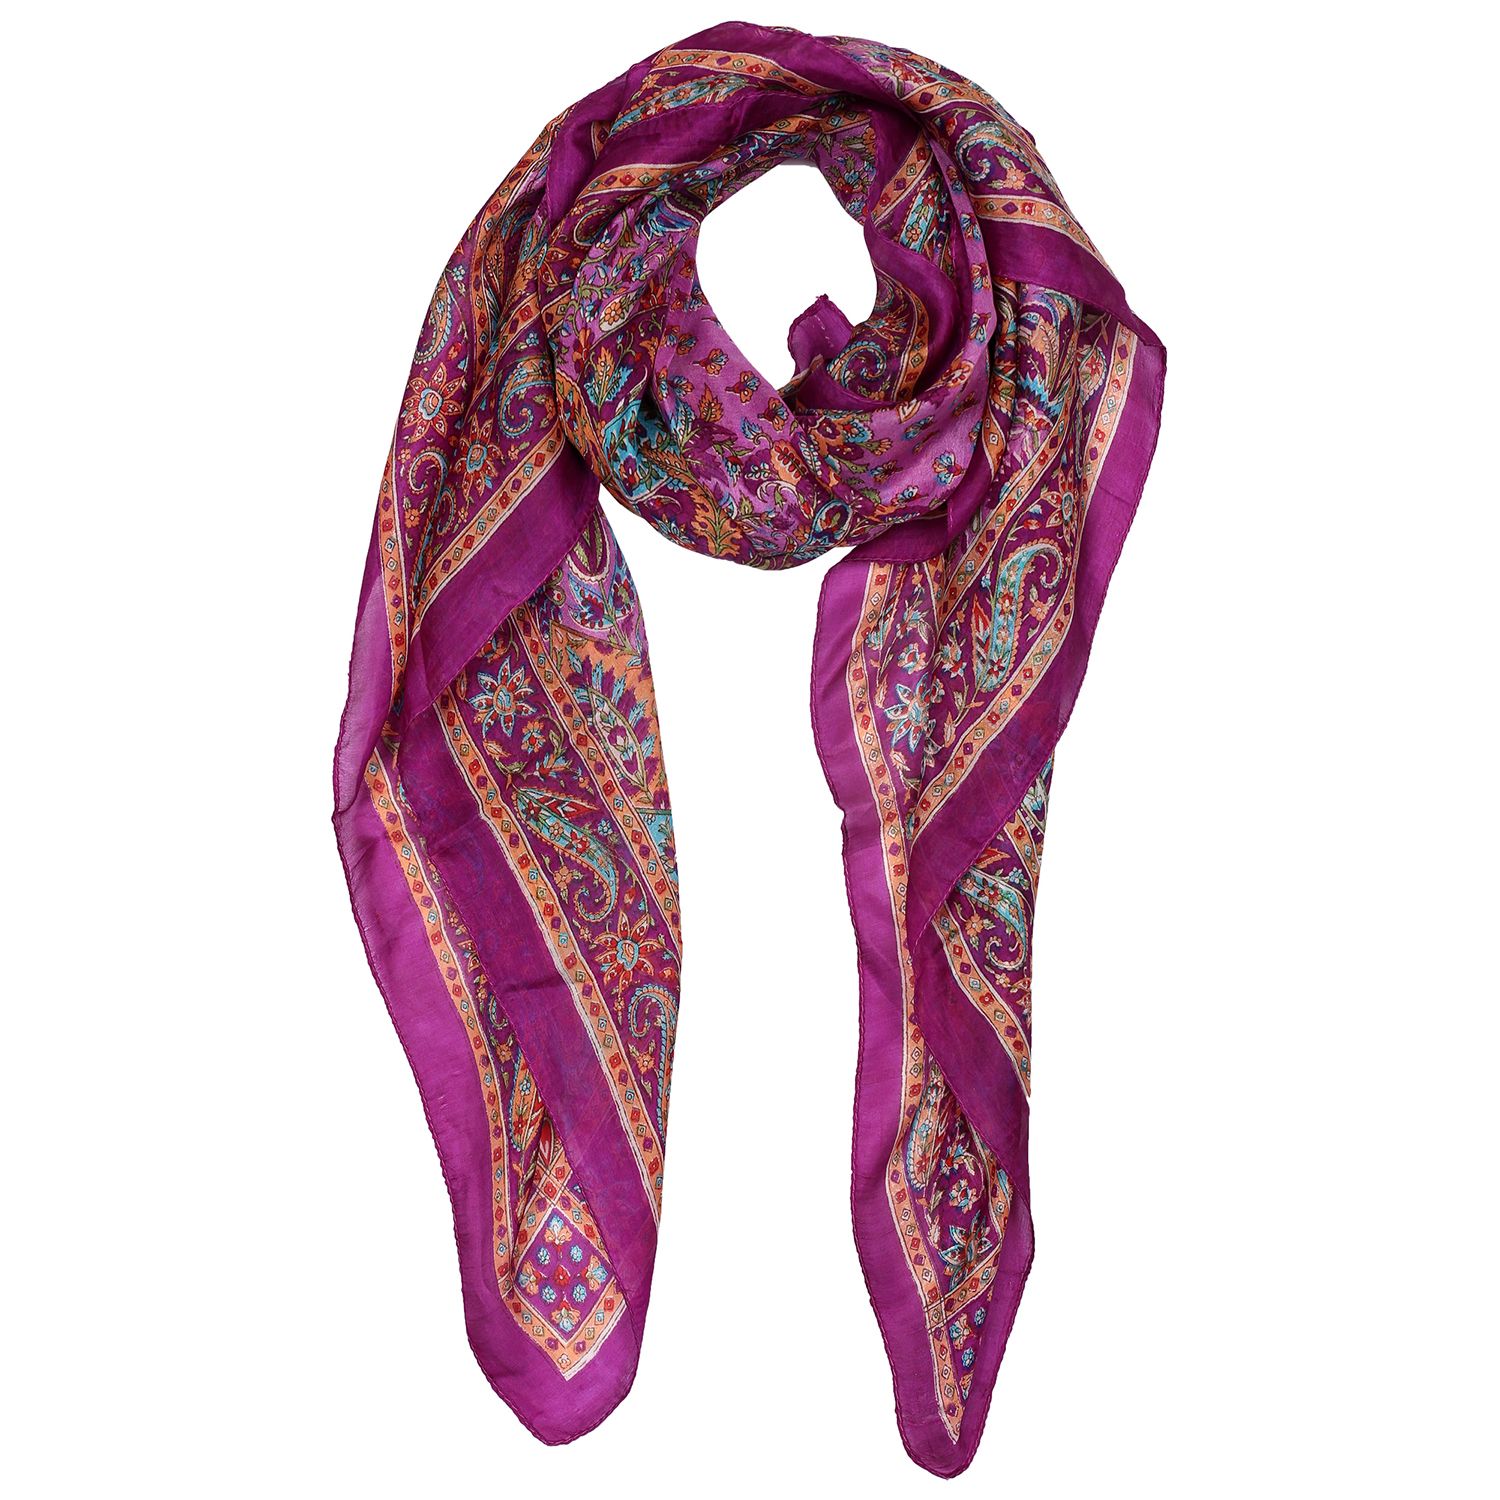 Silk Scarf Dark Rani Color With Small Floral Print